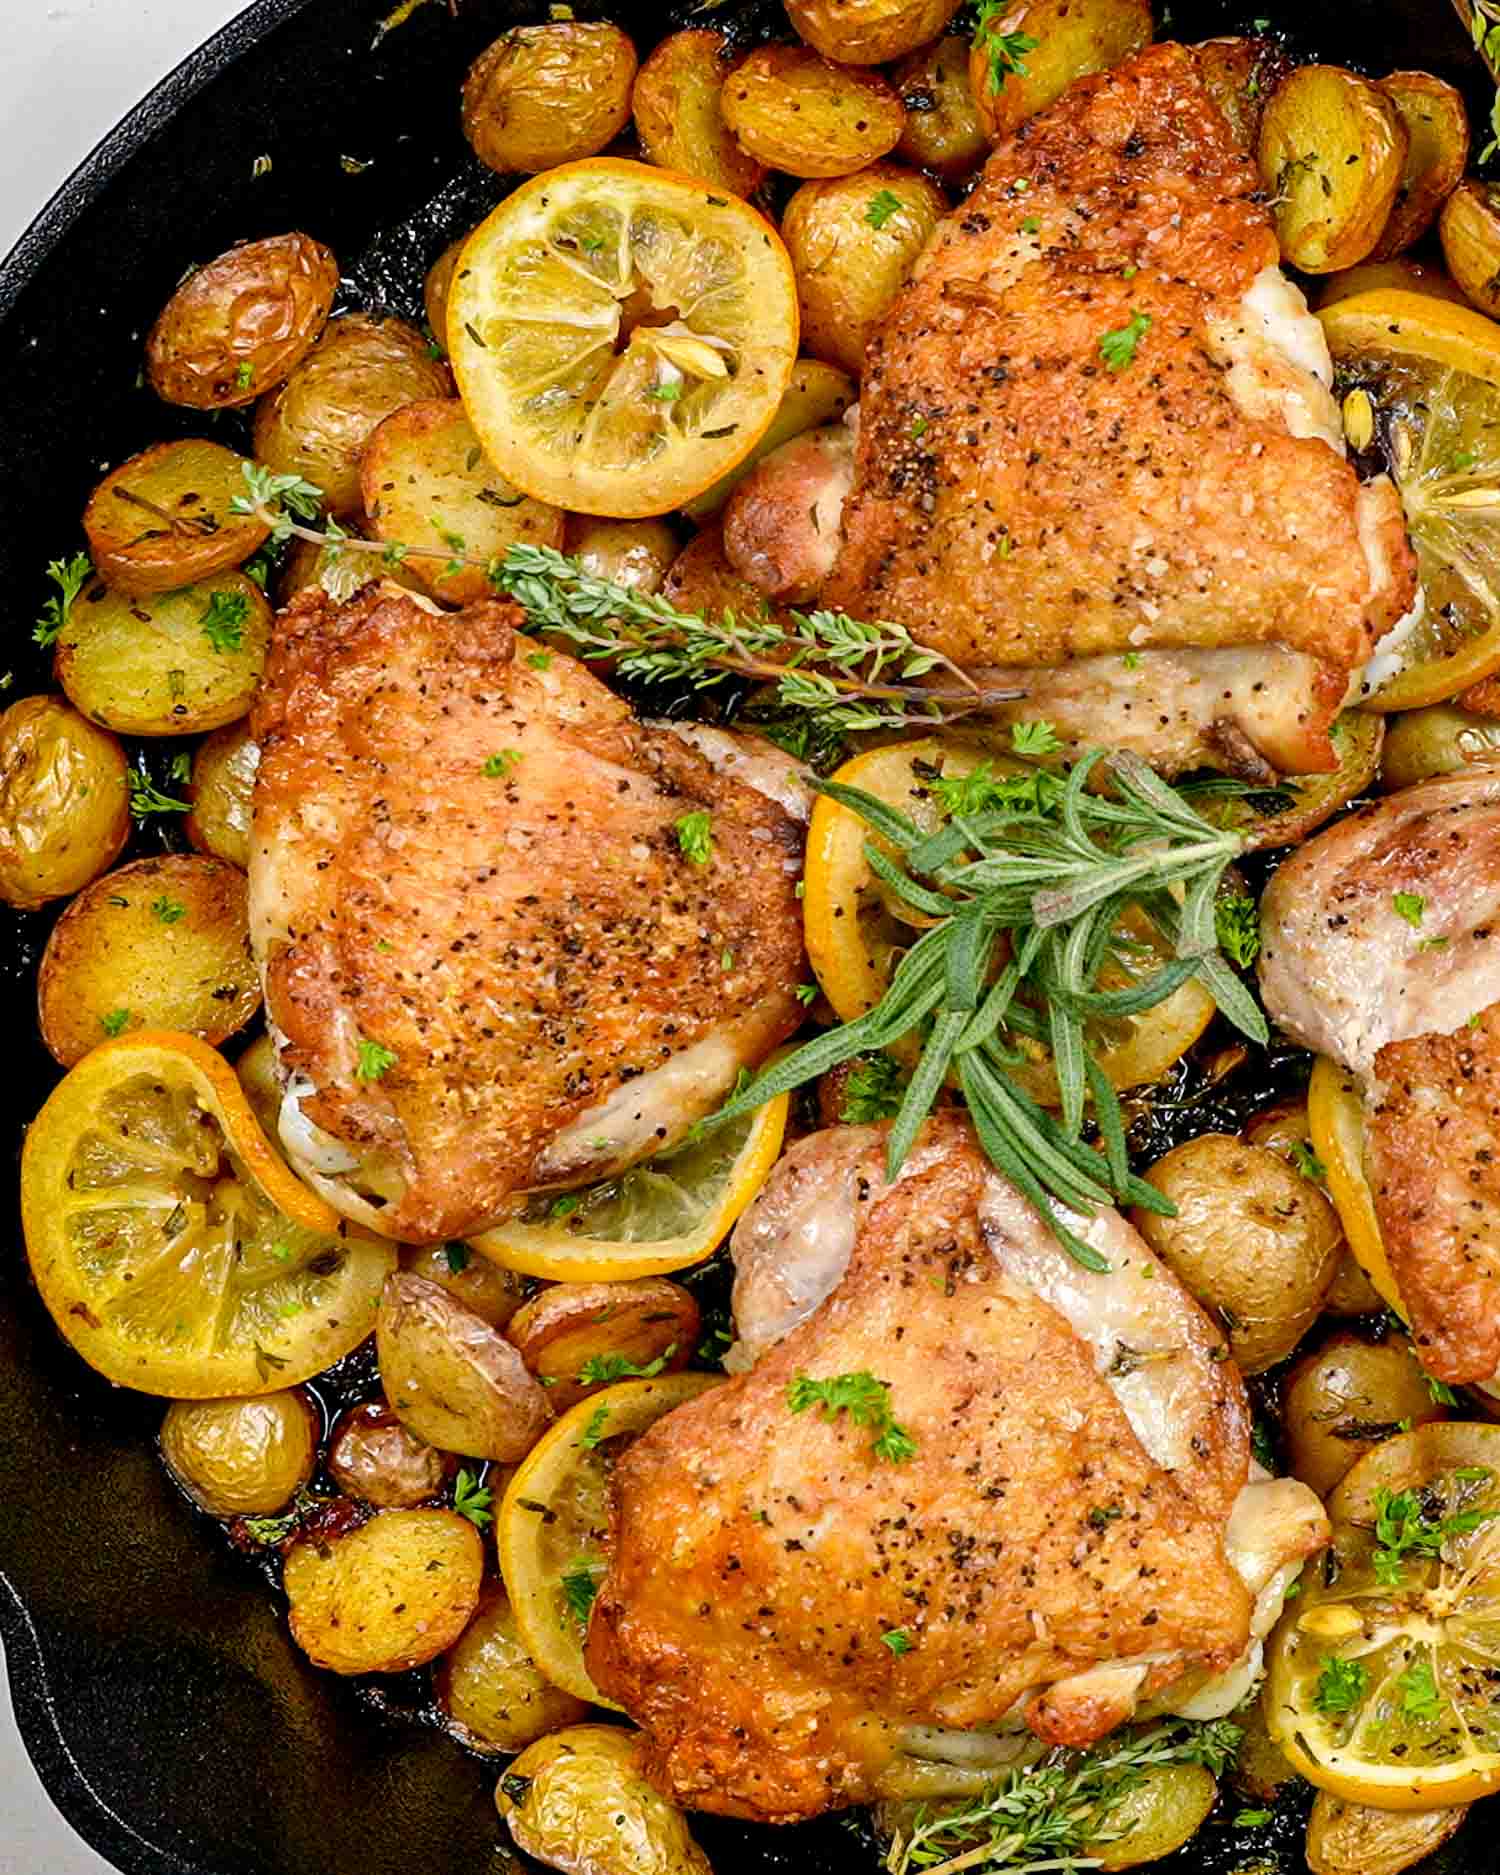 lemon herb chicken and potatoes in a skillet garnished with rosemary and lemon slices.